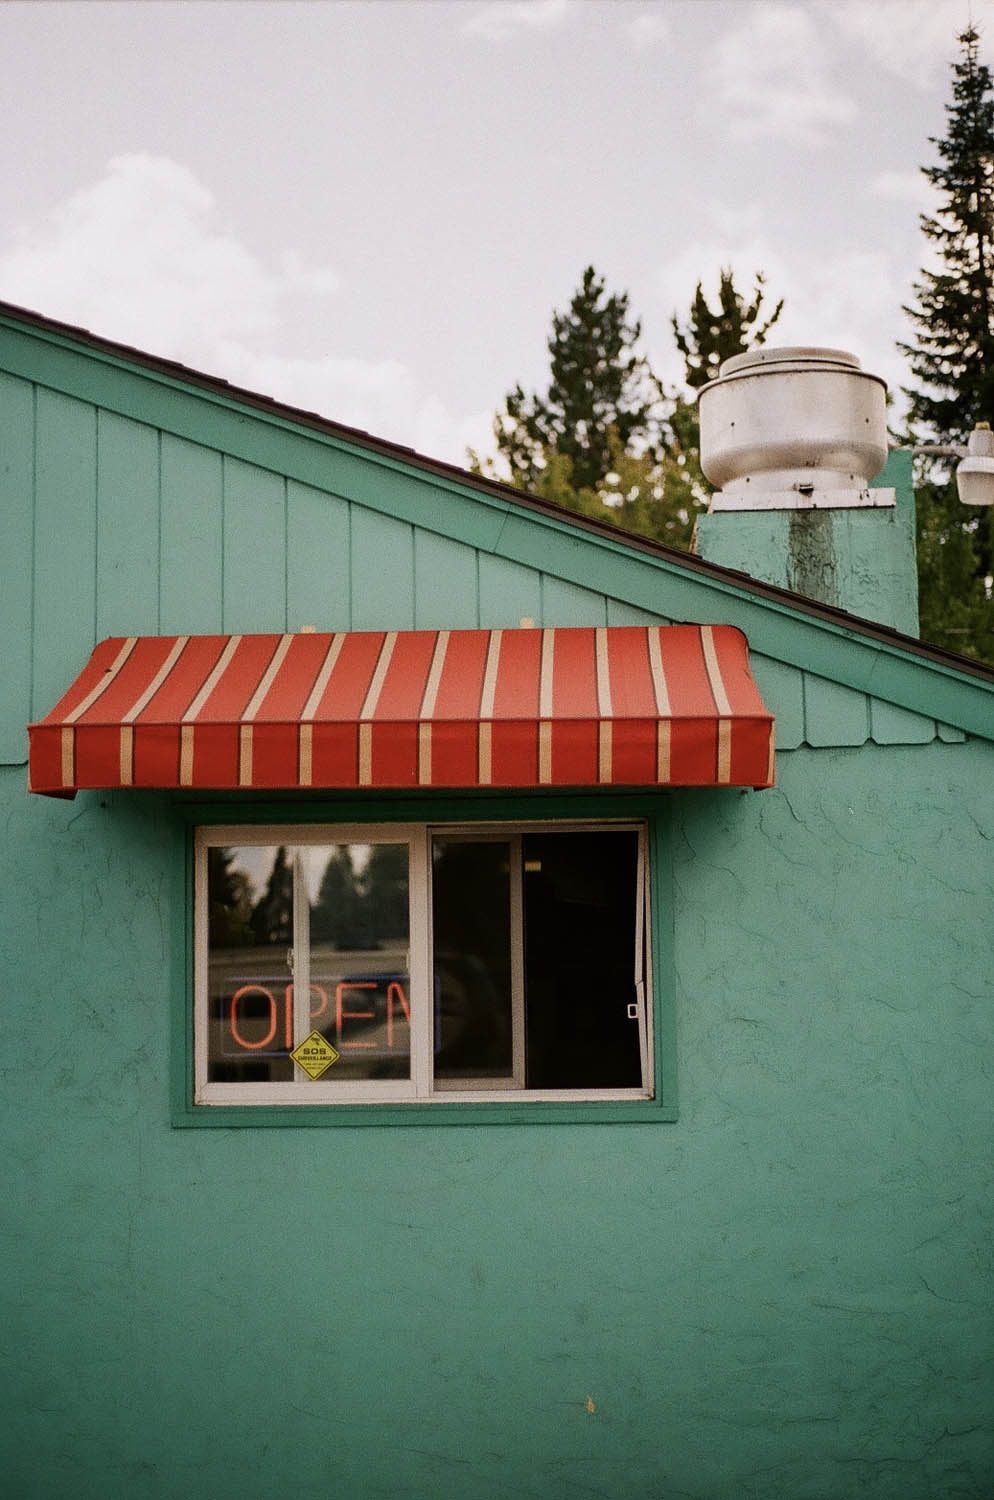 Lomography 400 ~ Canon AE-1 ~ Canon 50mm F1.8 When something catches your eye and you have to pull over to grab a shot. A small Mexican restaurant is open for business